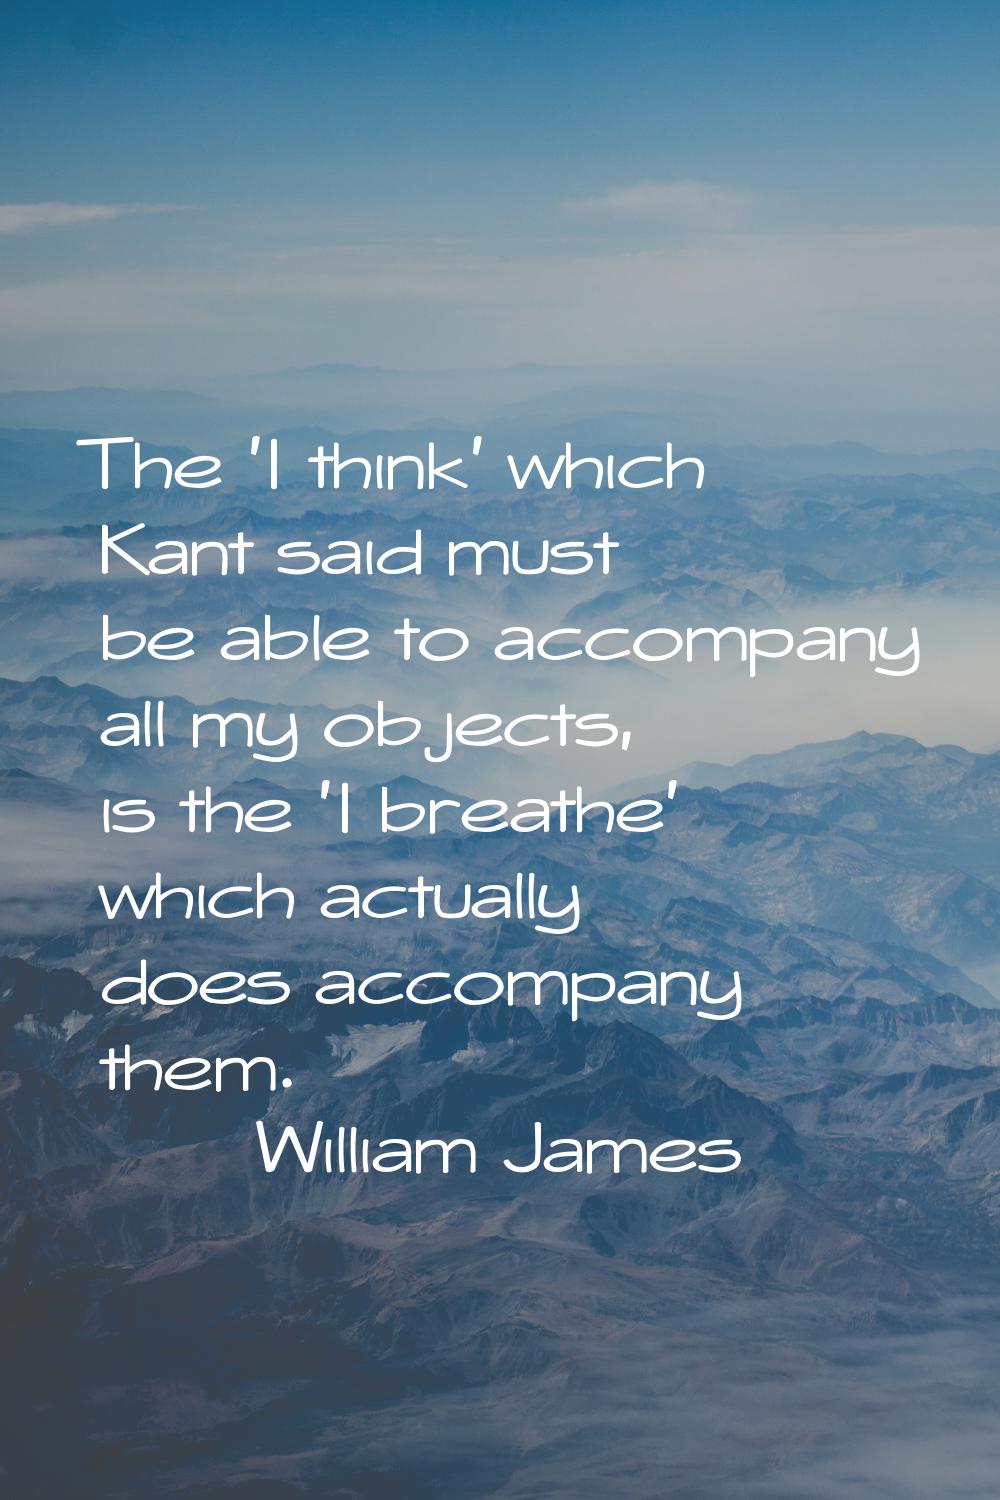 The 'I think' which Kant said must be able to accompany all my objects, is the 'I breathe' which ac